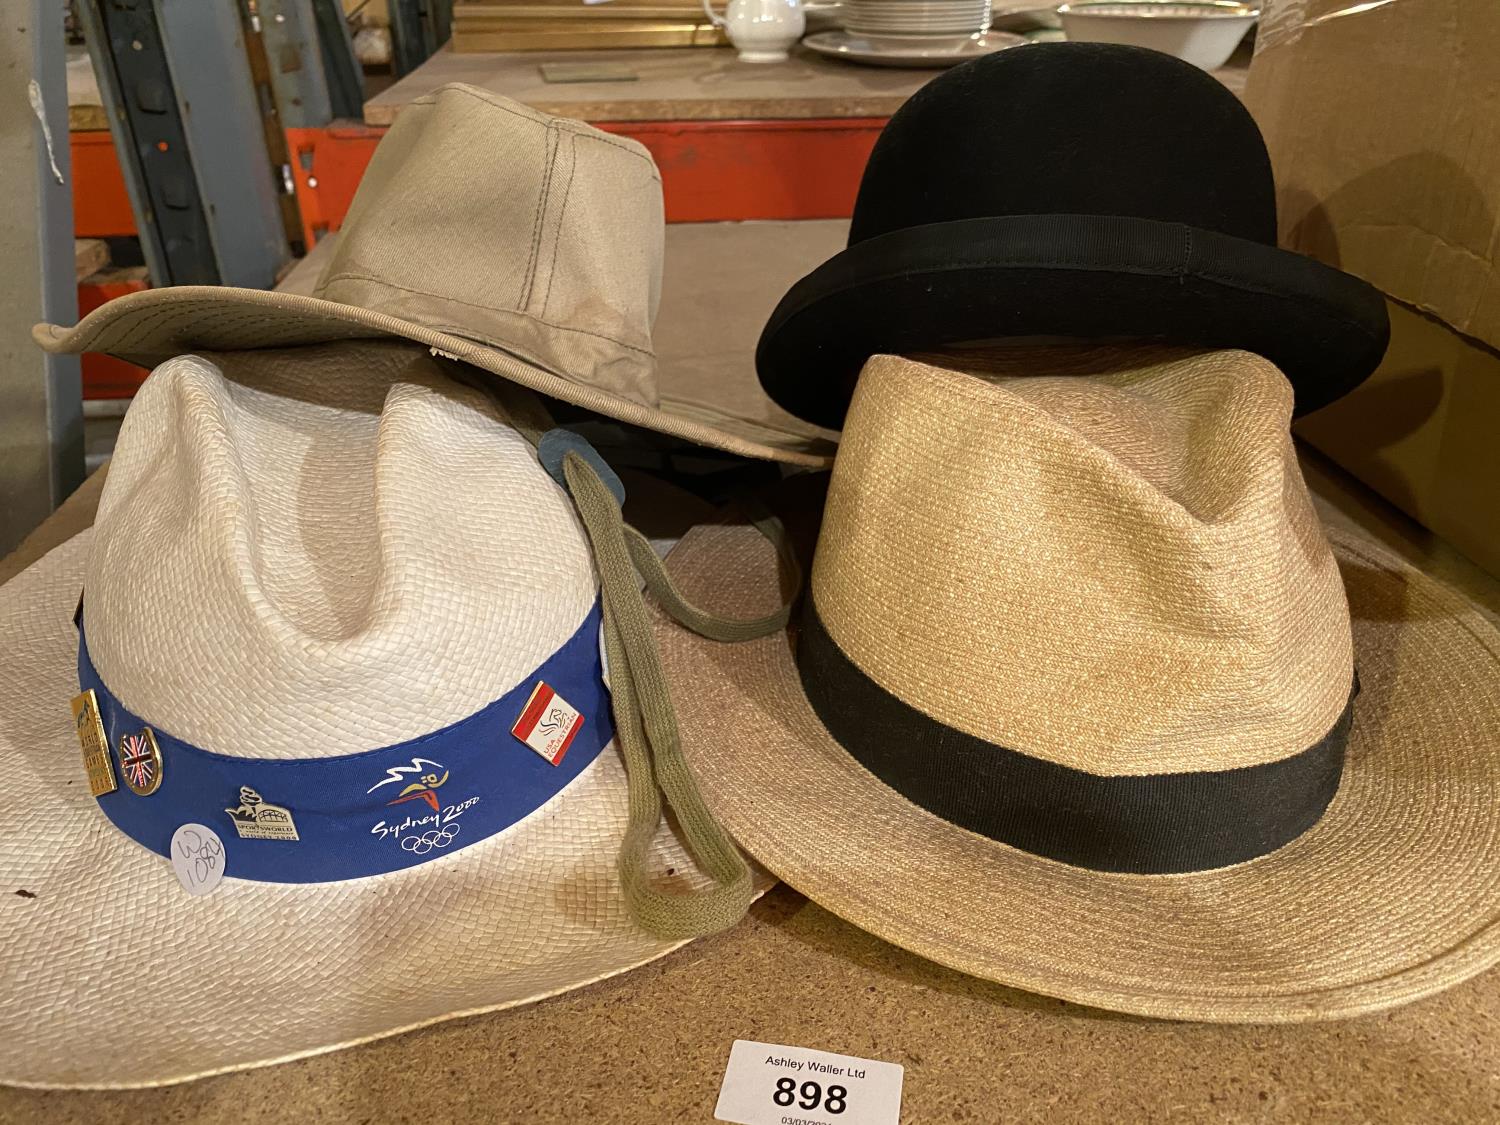 FOUR VARIOUS GENTLEMEN'S HATS TO INCLUDE A BOWLER AND A PANAMA DATING FROM THE SYDNEY OLYMPIC